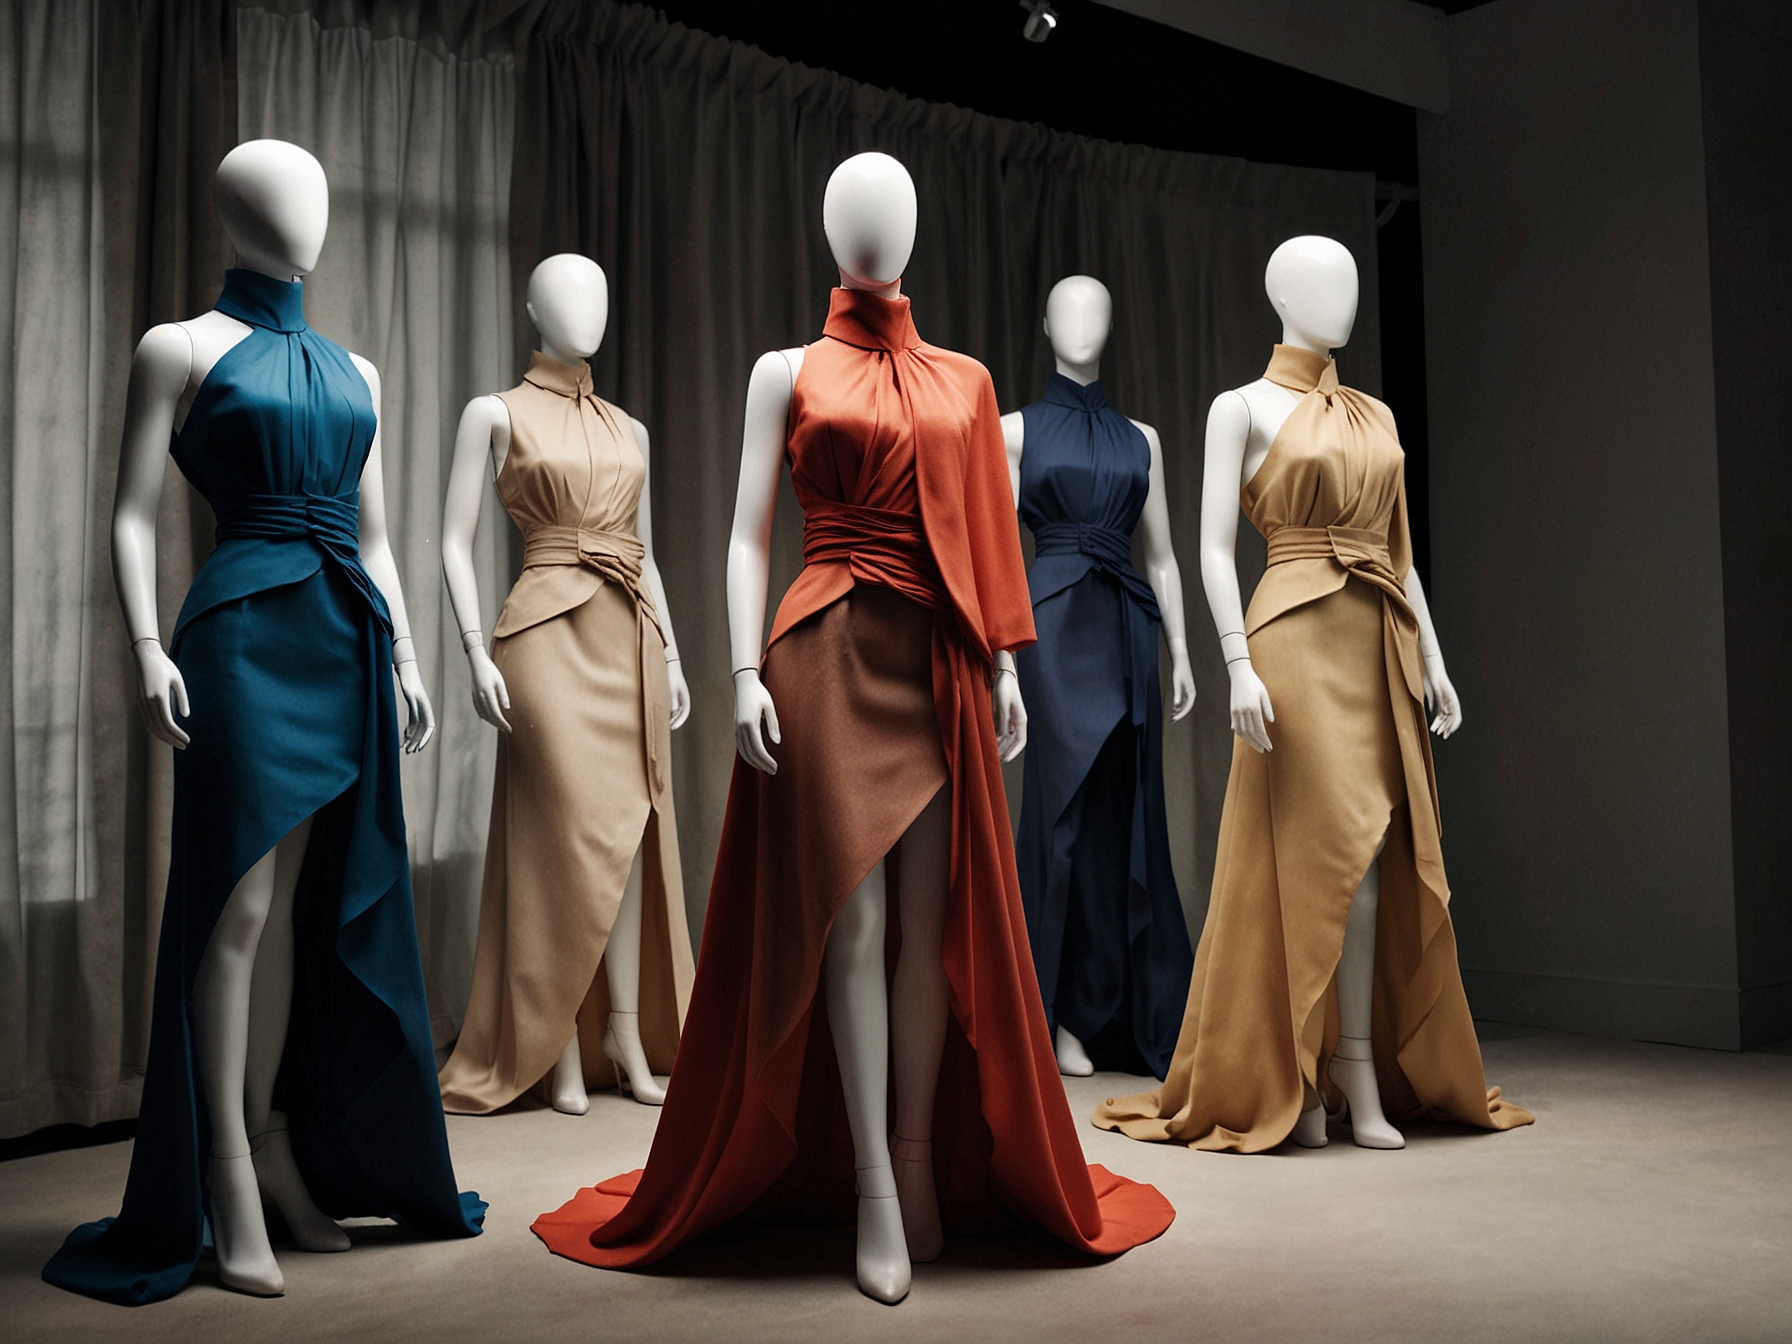 A collection of strong wool garments from Georgina's fashion label, draped elegantly on mannequins. The pieces reflect a blend of contemporary and timeless designs, emphasizing sustainability.